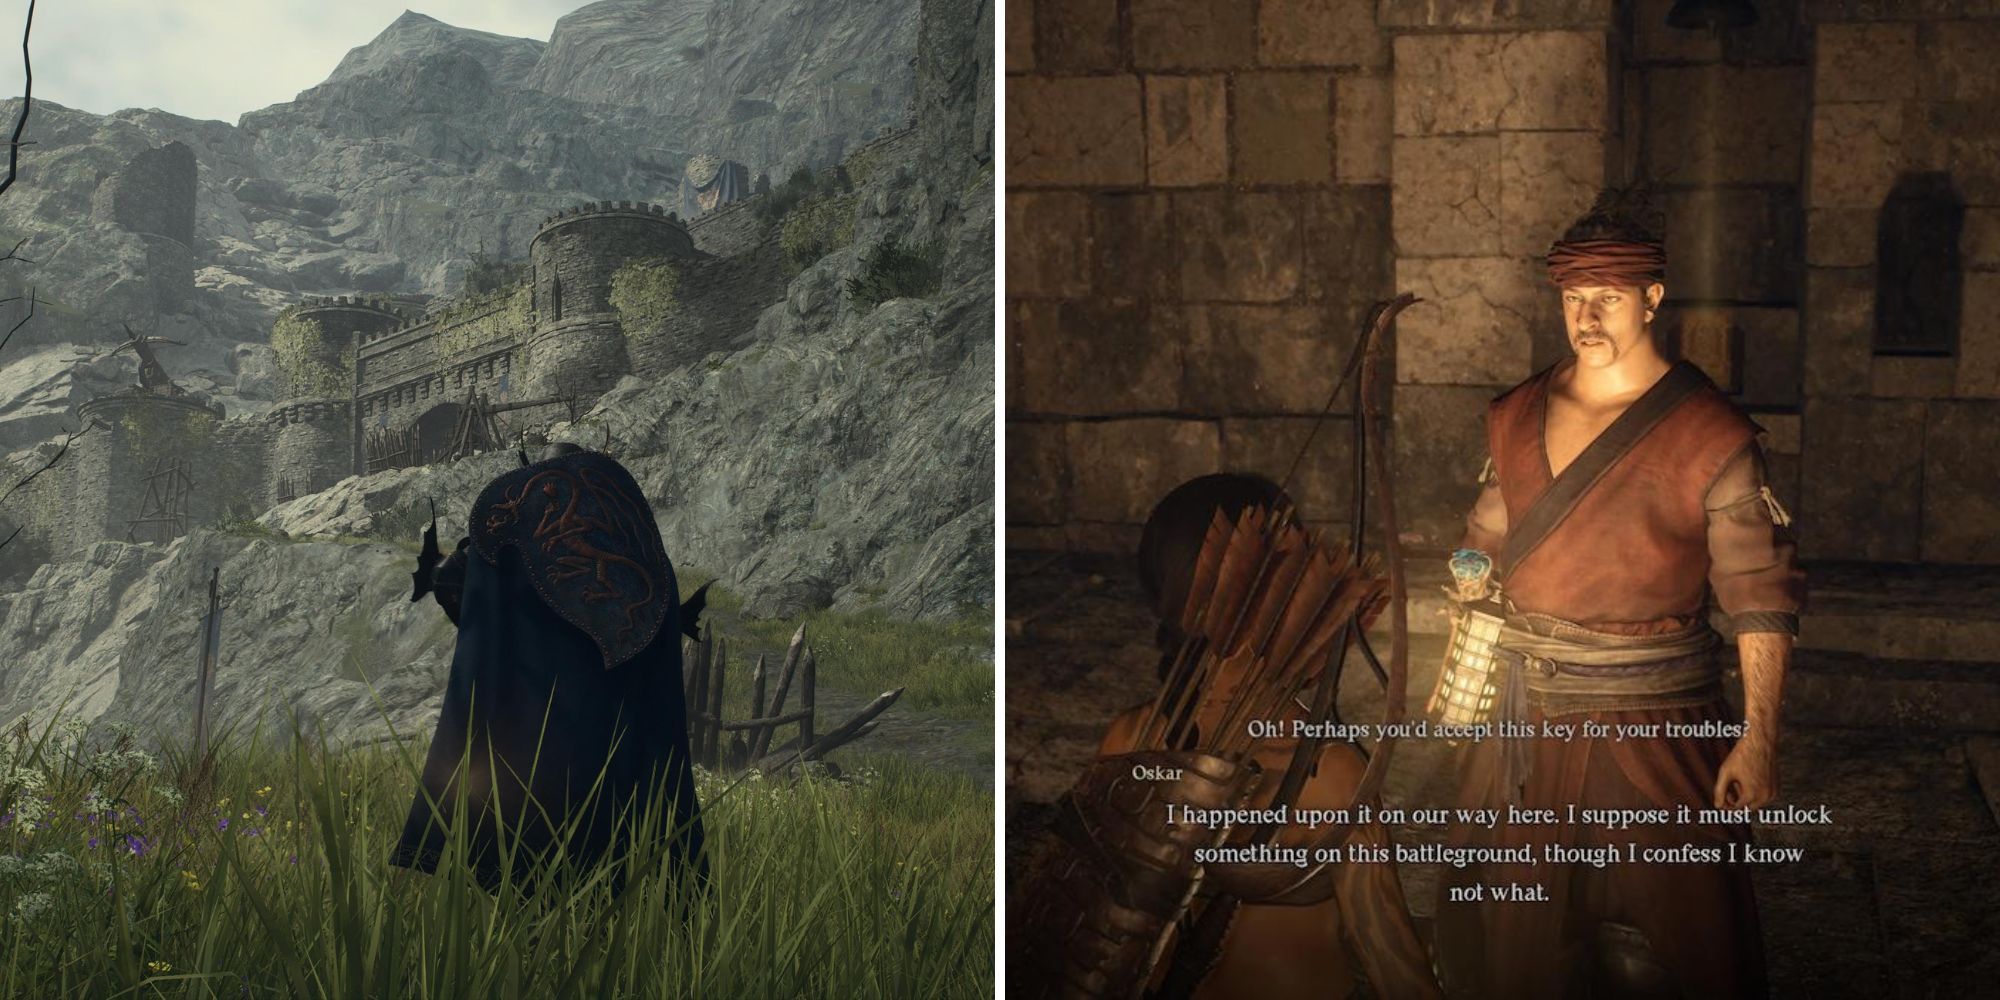 The Castle In The Ancient Battlegroun & The Player Talking To Oskar 